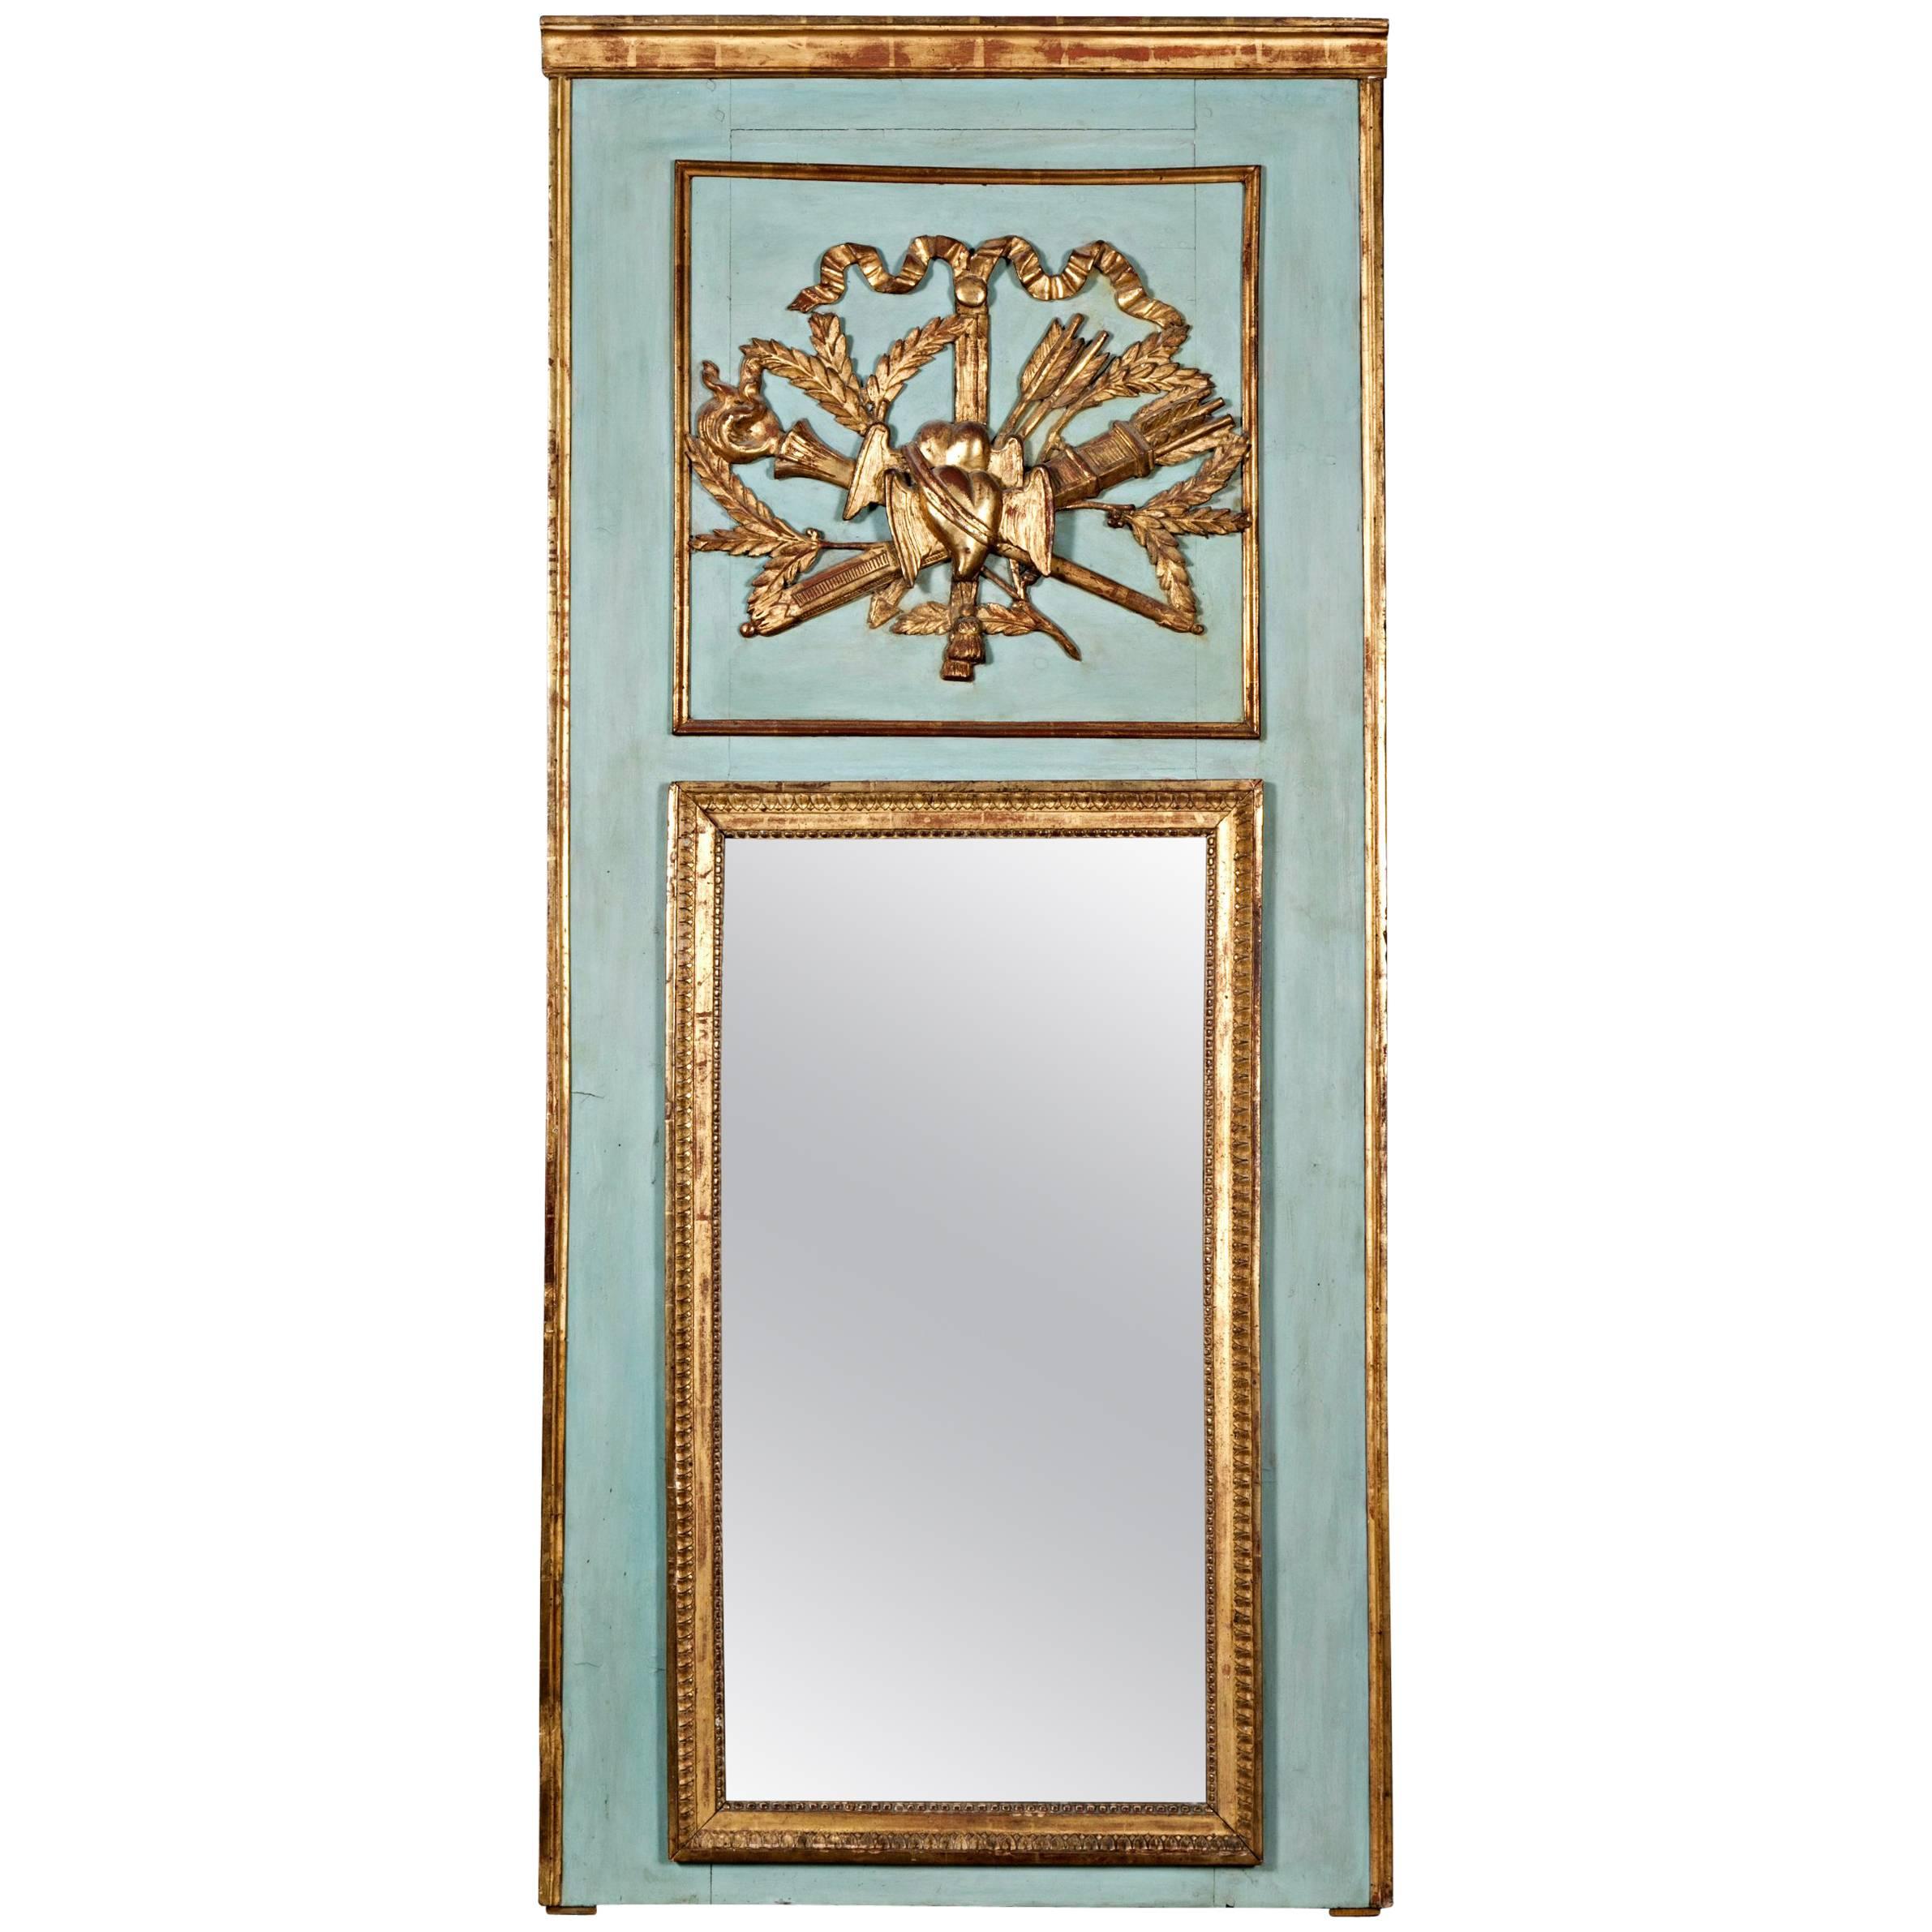 Louis XVI Period Painted and Parcel-Gilt Marriage Trumeau Mirror